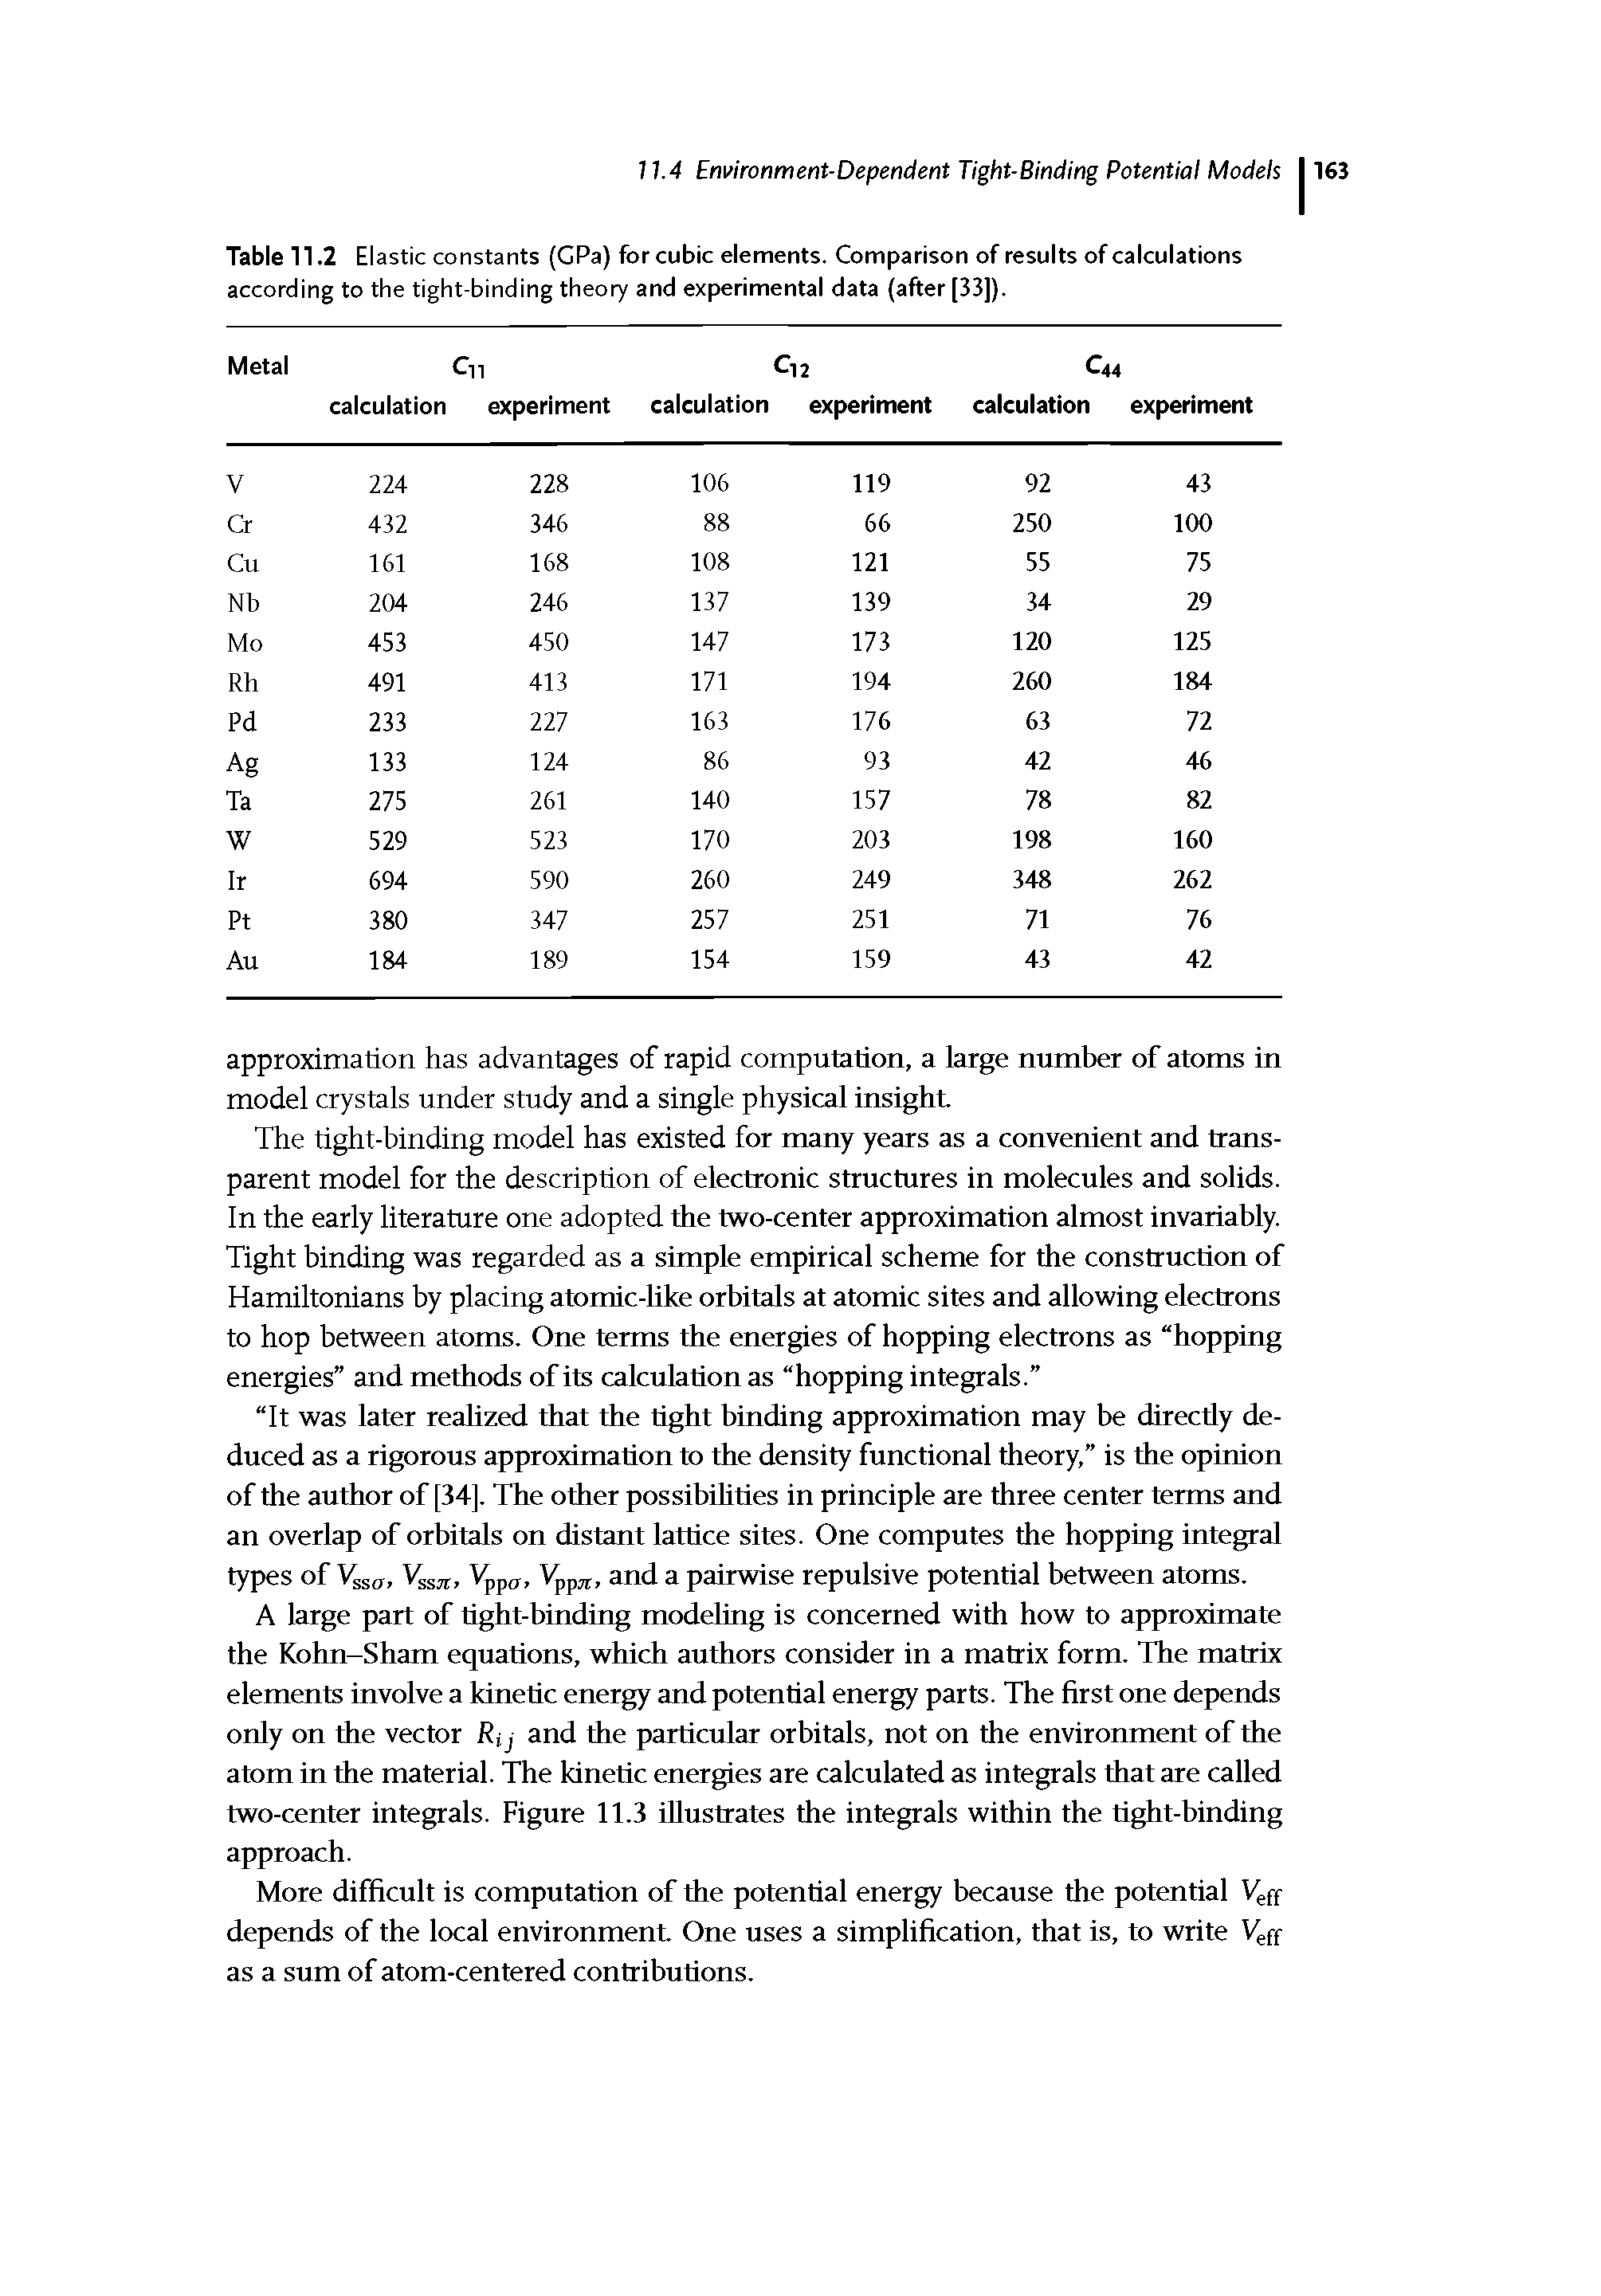 Table 11.2 Elastic constants (CPa) for cubic elements. Comparison of results of calculations according to the tight-binding theory and experimental data (after [33]).